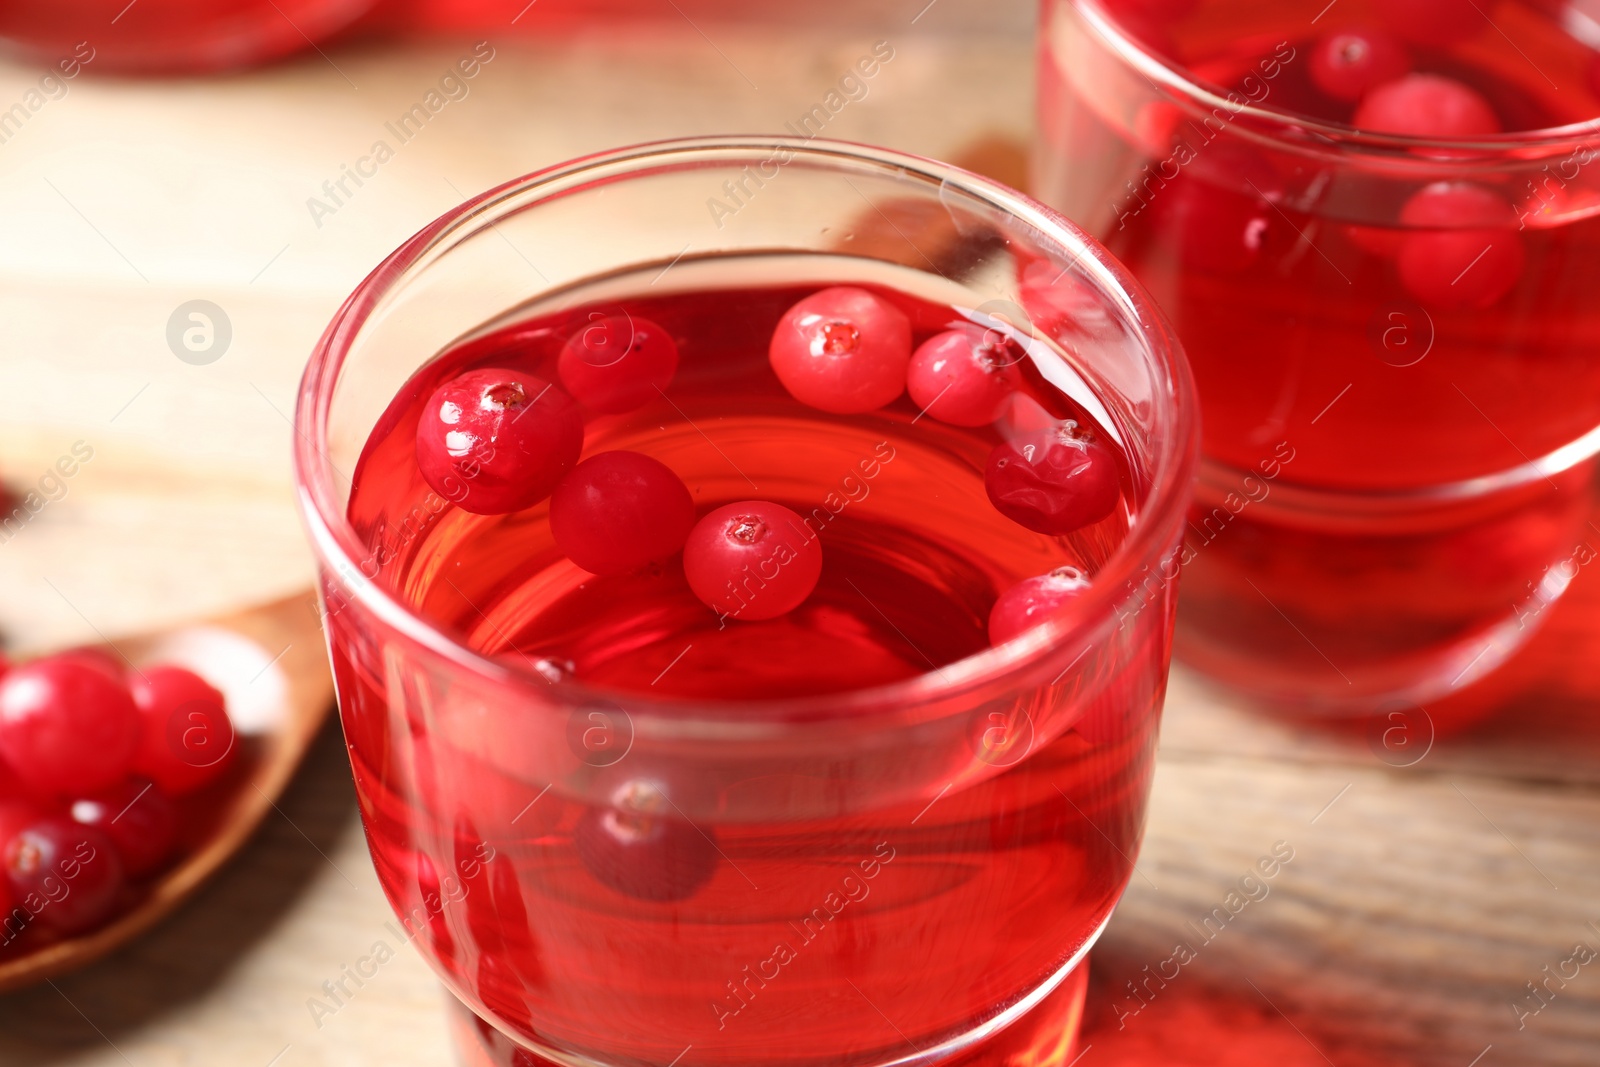 Photo of Tasty cranberry juice in glasses and fresh berries on wooden table, closeup